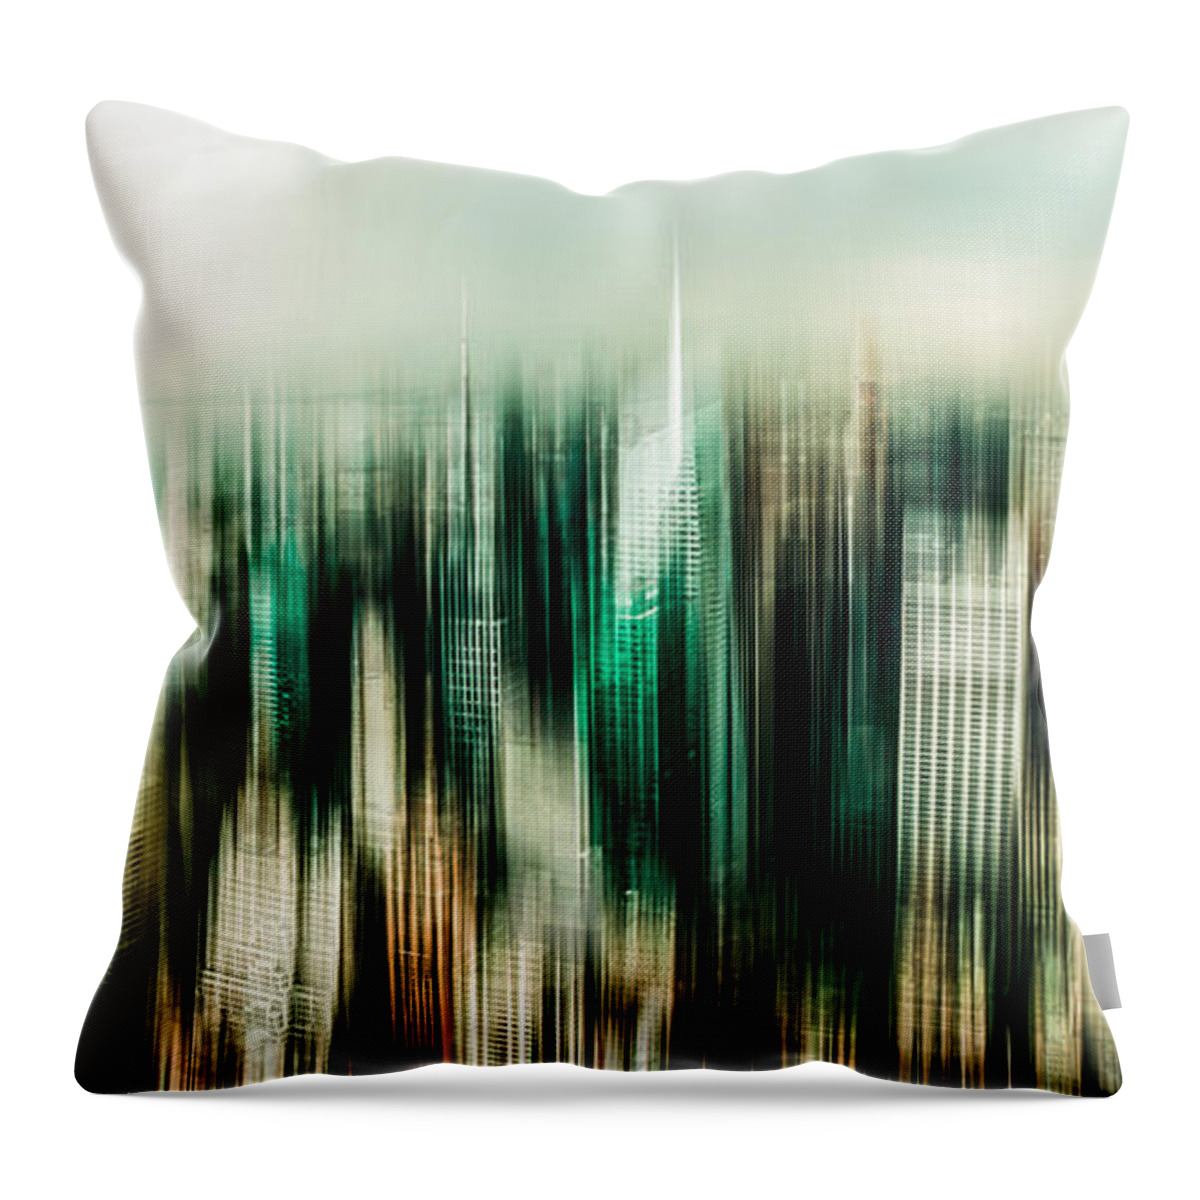 Nyc Throw Pillow featuring the photograph Manhattan Panorama Abstract by Hannes Cmarits